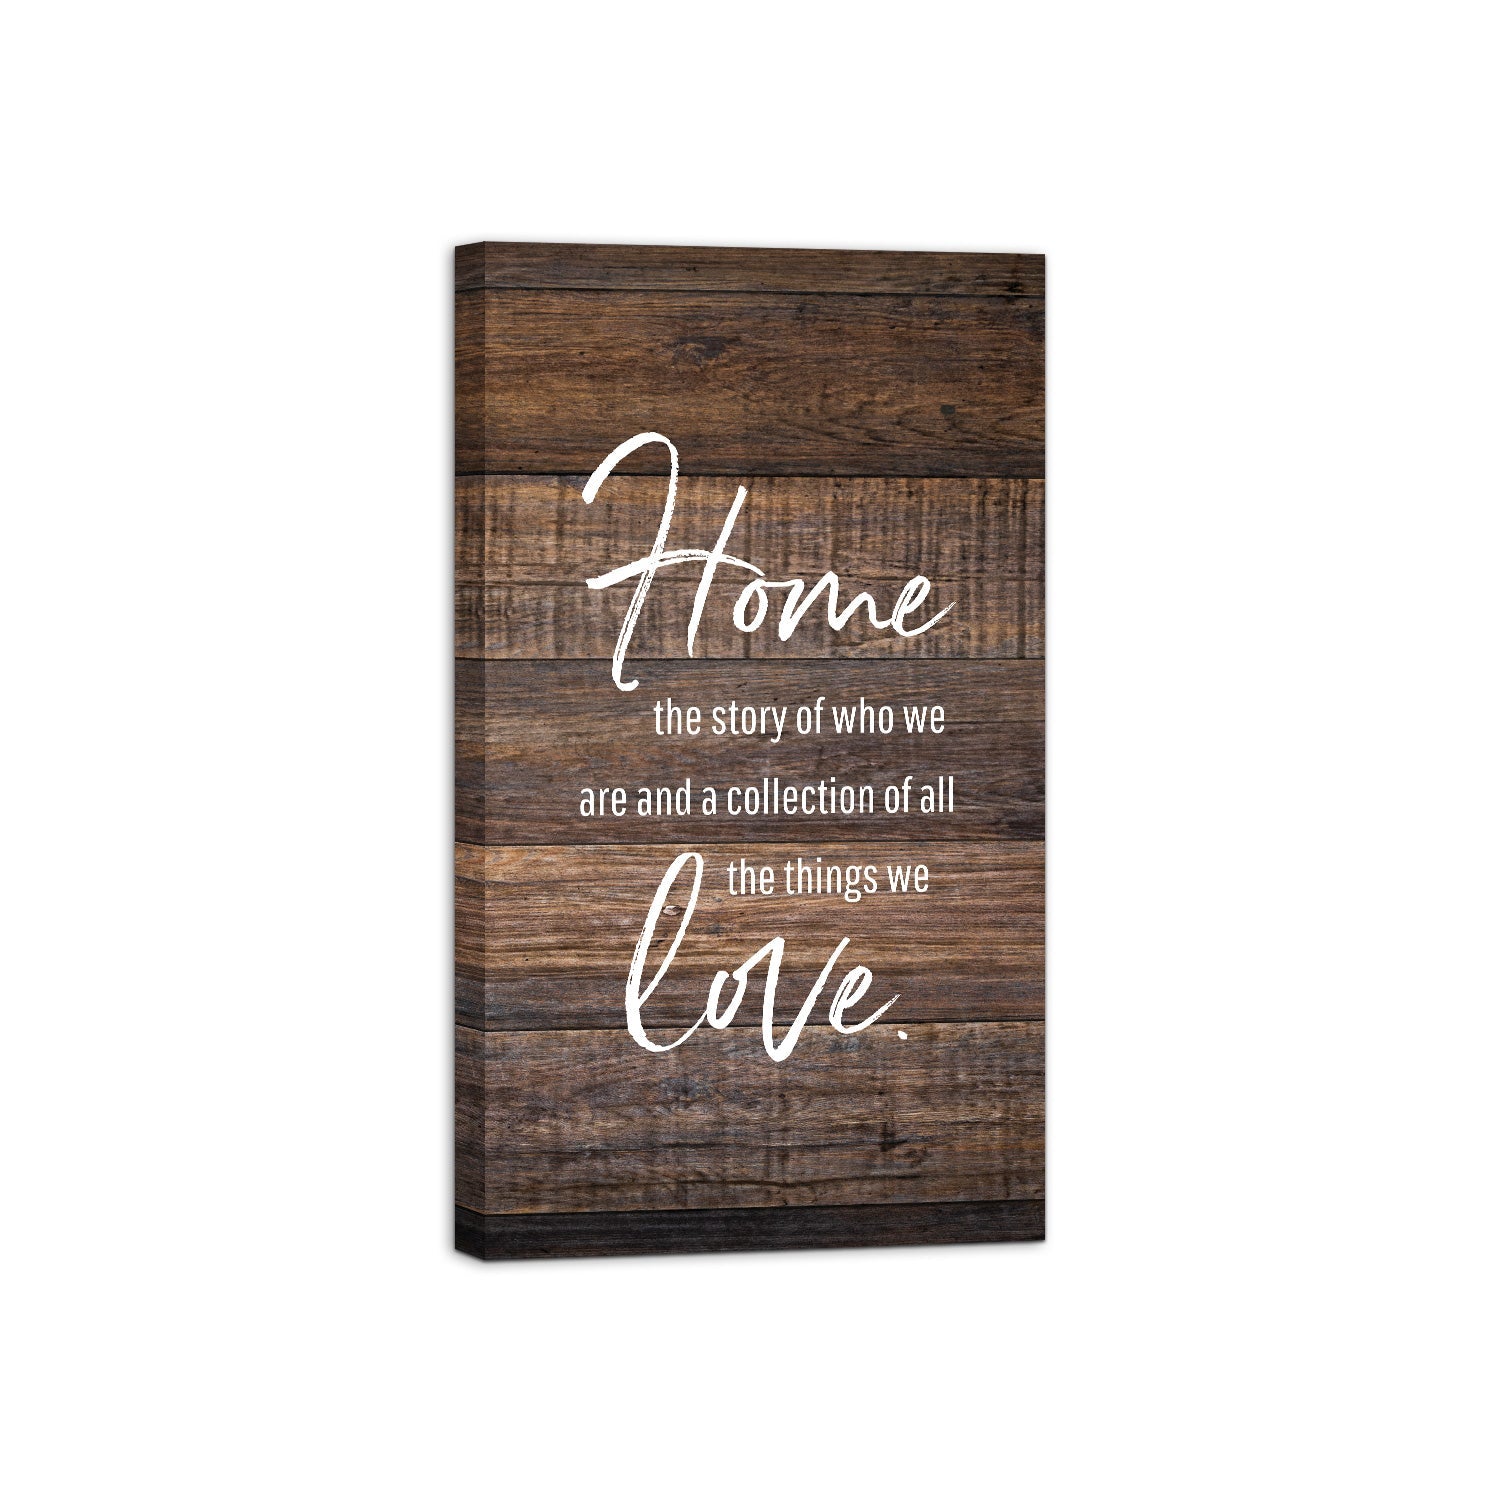 Every Love Story is Beautiful Inspirational Canvas Wall Art Framed Modern Wall Decor Decorative Accents For Walls Ready to Hang for Home Living Room Bedroom Entryway Kitchen Office Size 20” x 40” - LifeSong Milestones